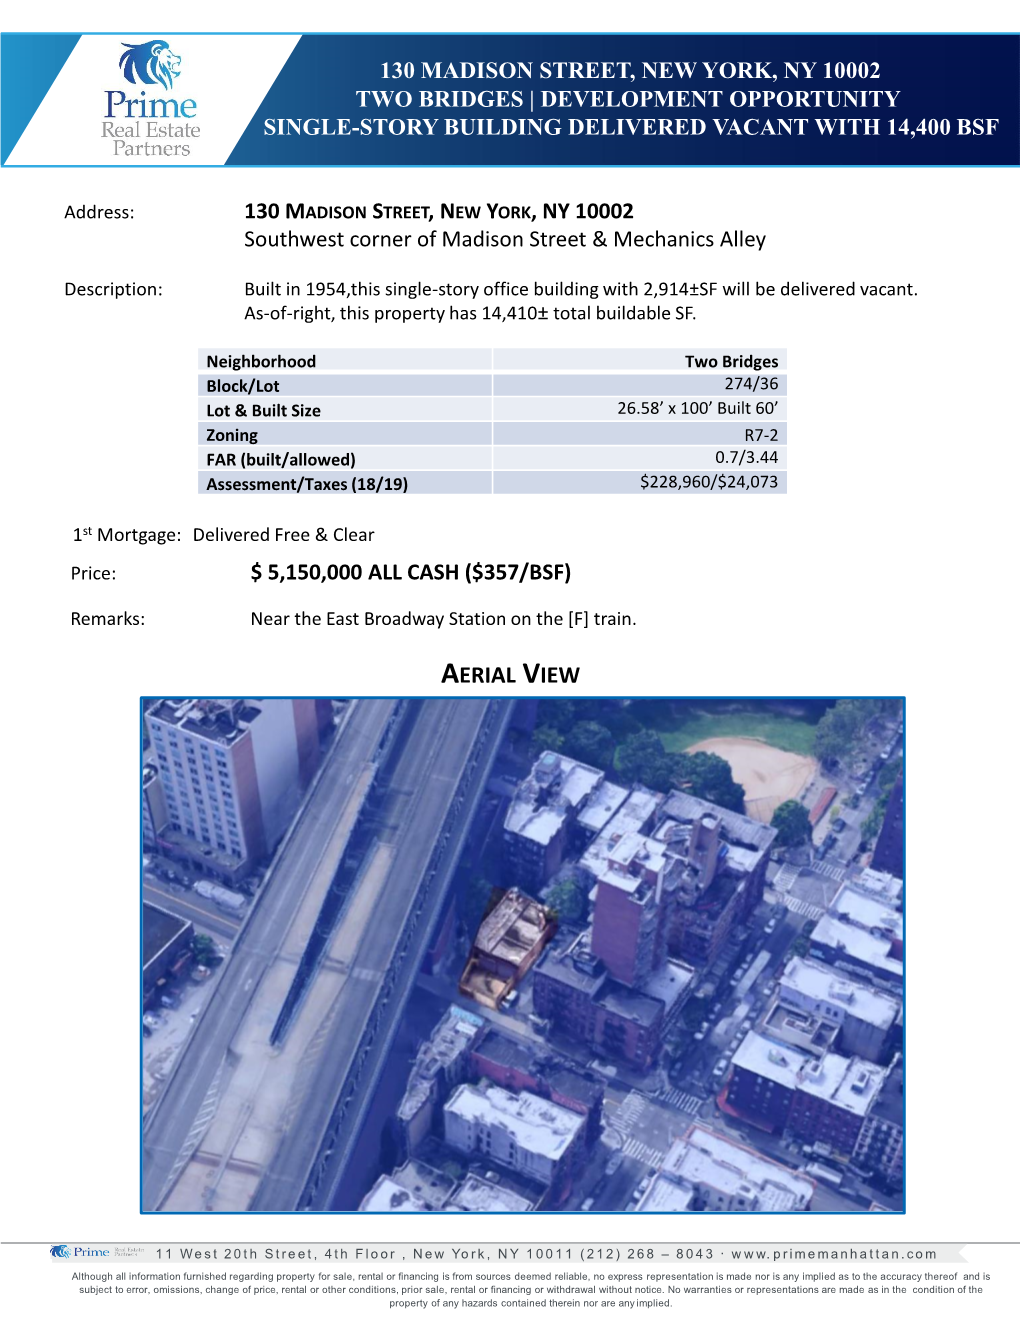 130 Madison Street, New York, Ny 10002 Two Bridges | Development Opportunity Single-Story Building Delivered Vacant with 14,400 Bsf